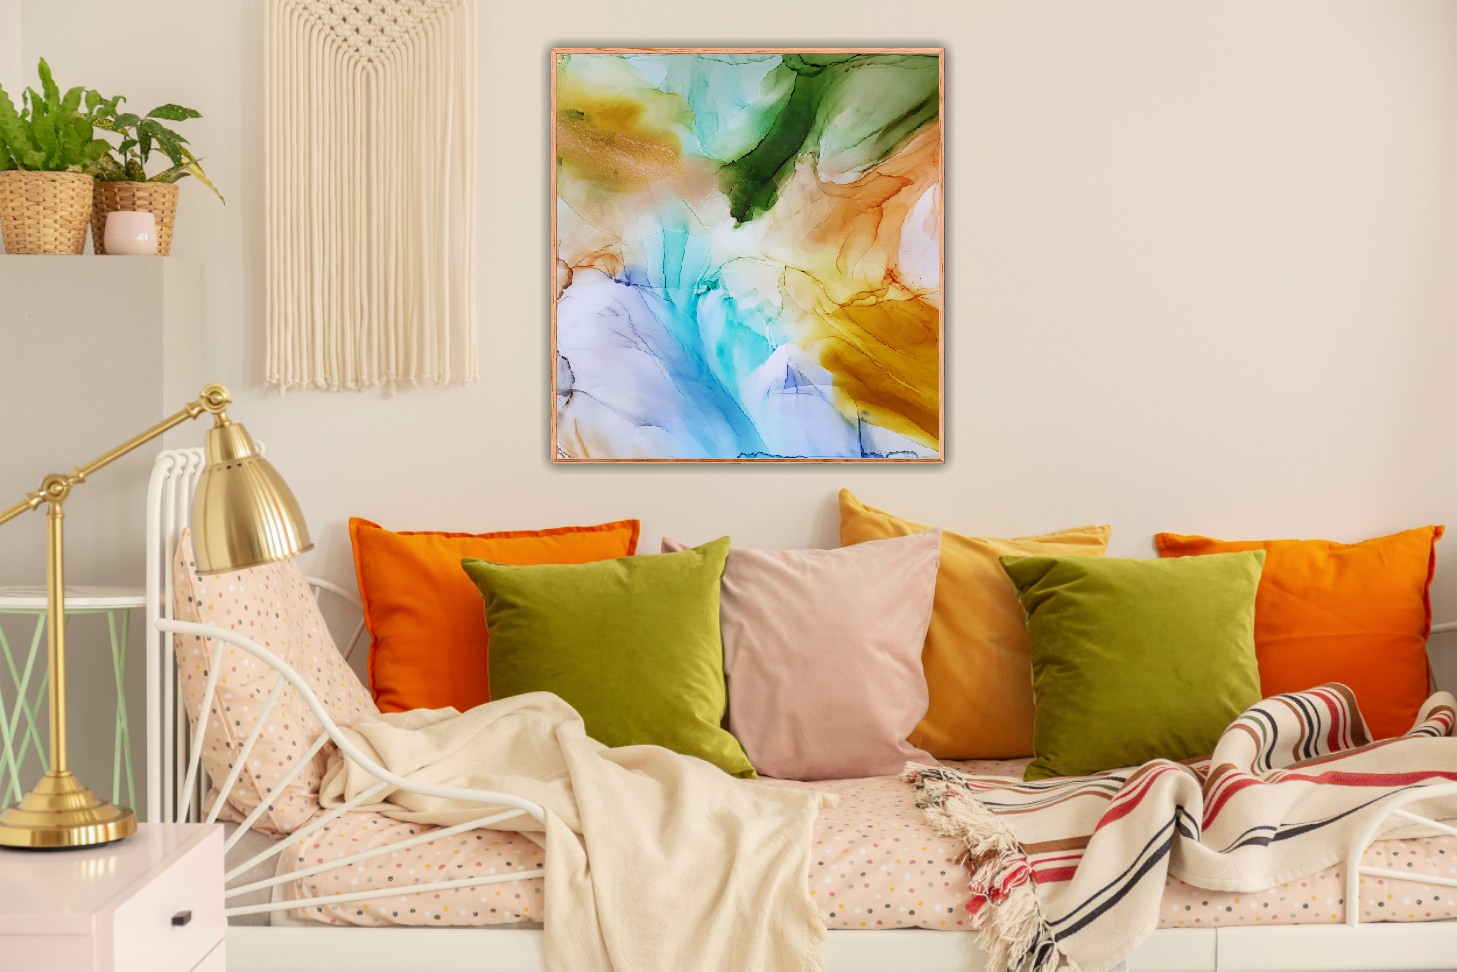 Tips For Decorating With Abstract Paintings